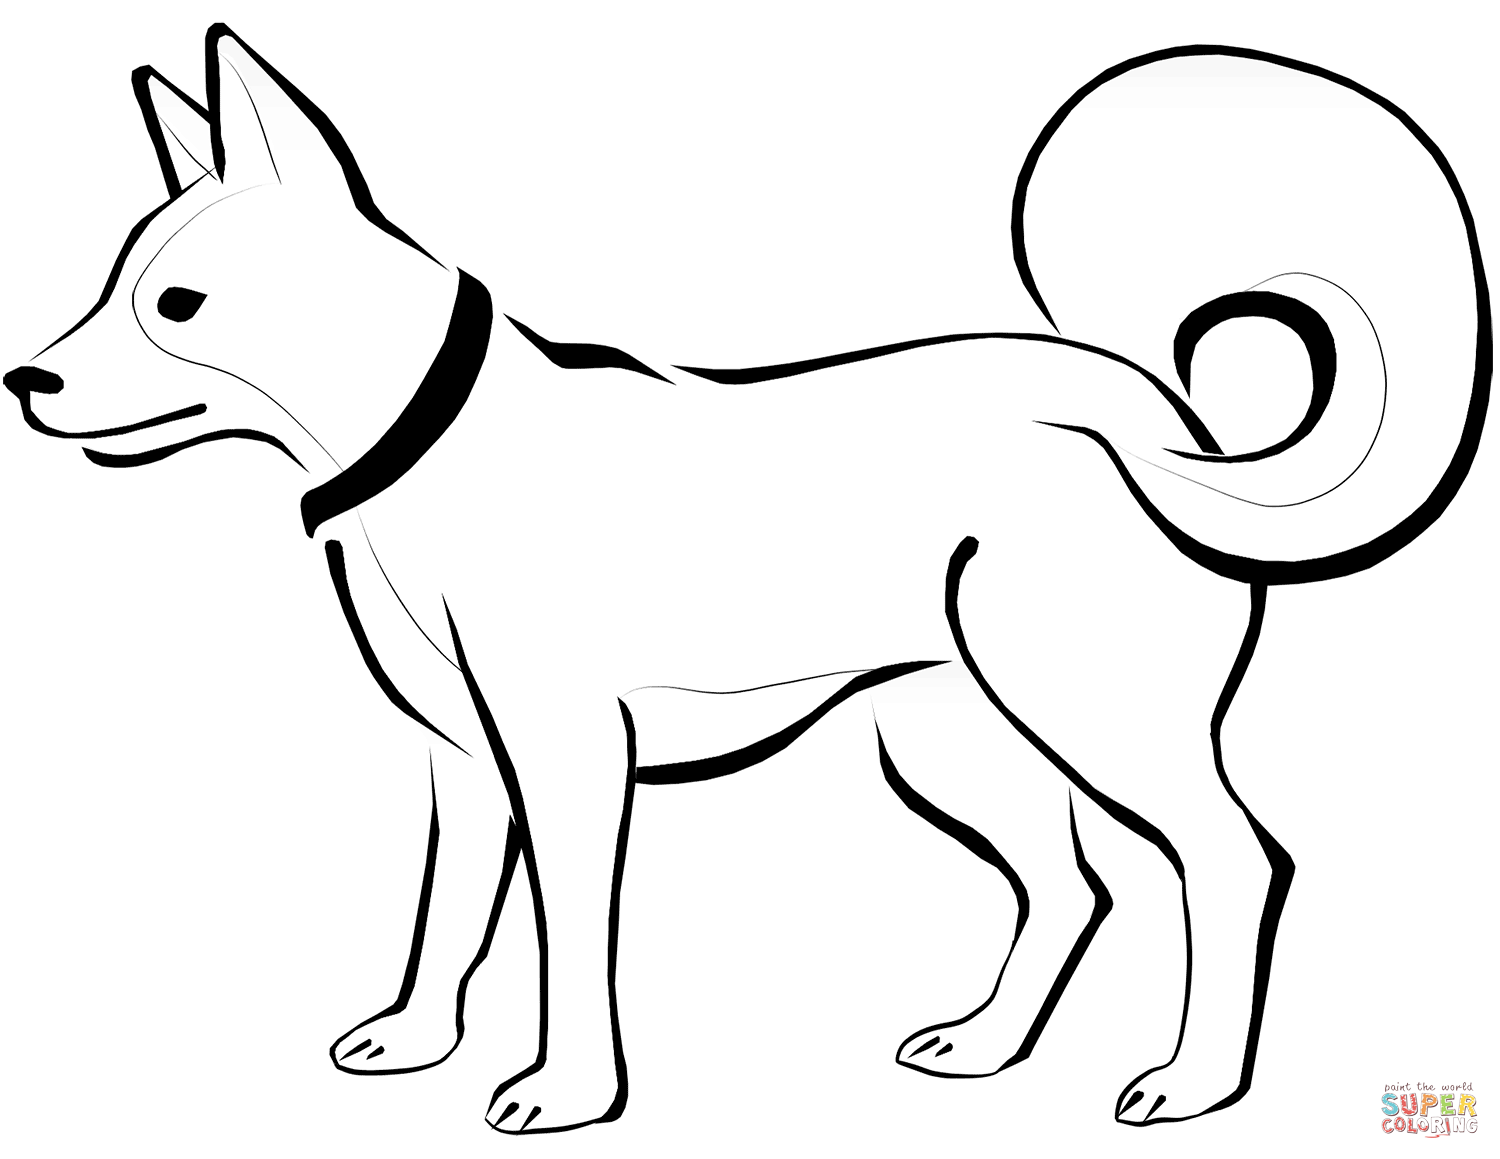 Eskimo dog coloring page free printable coloring pages